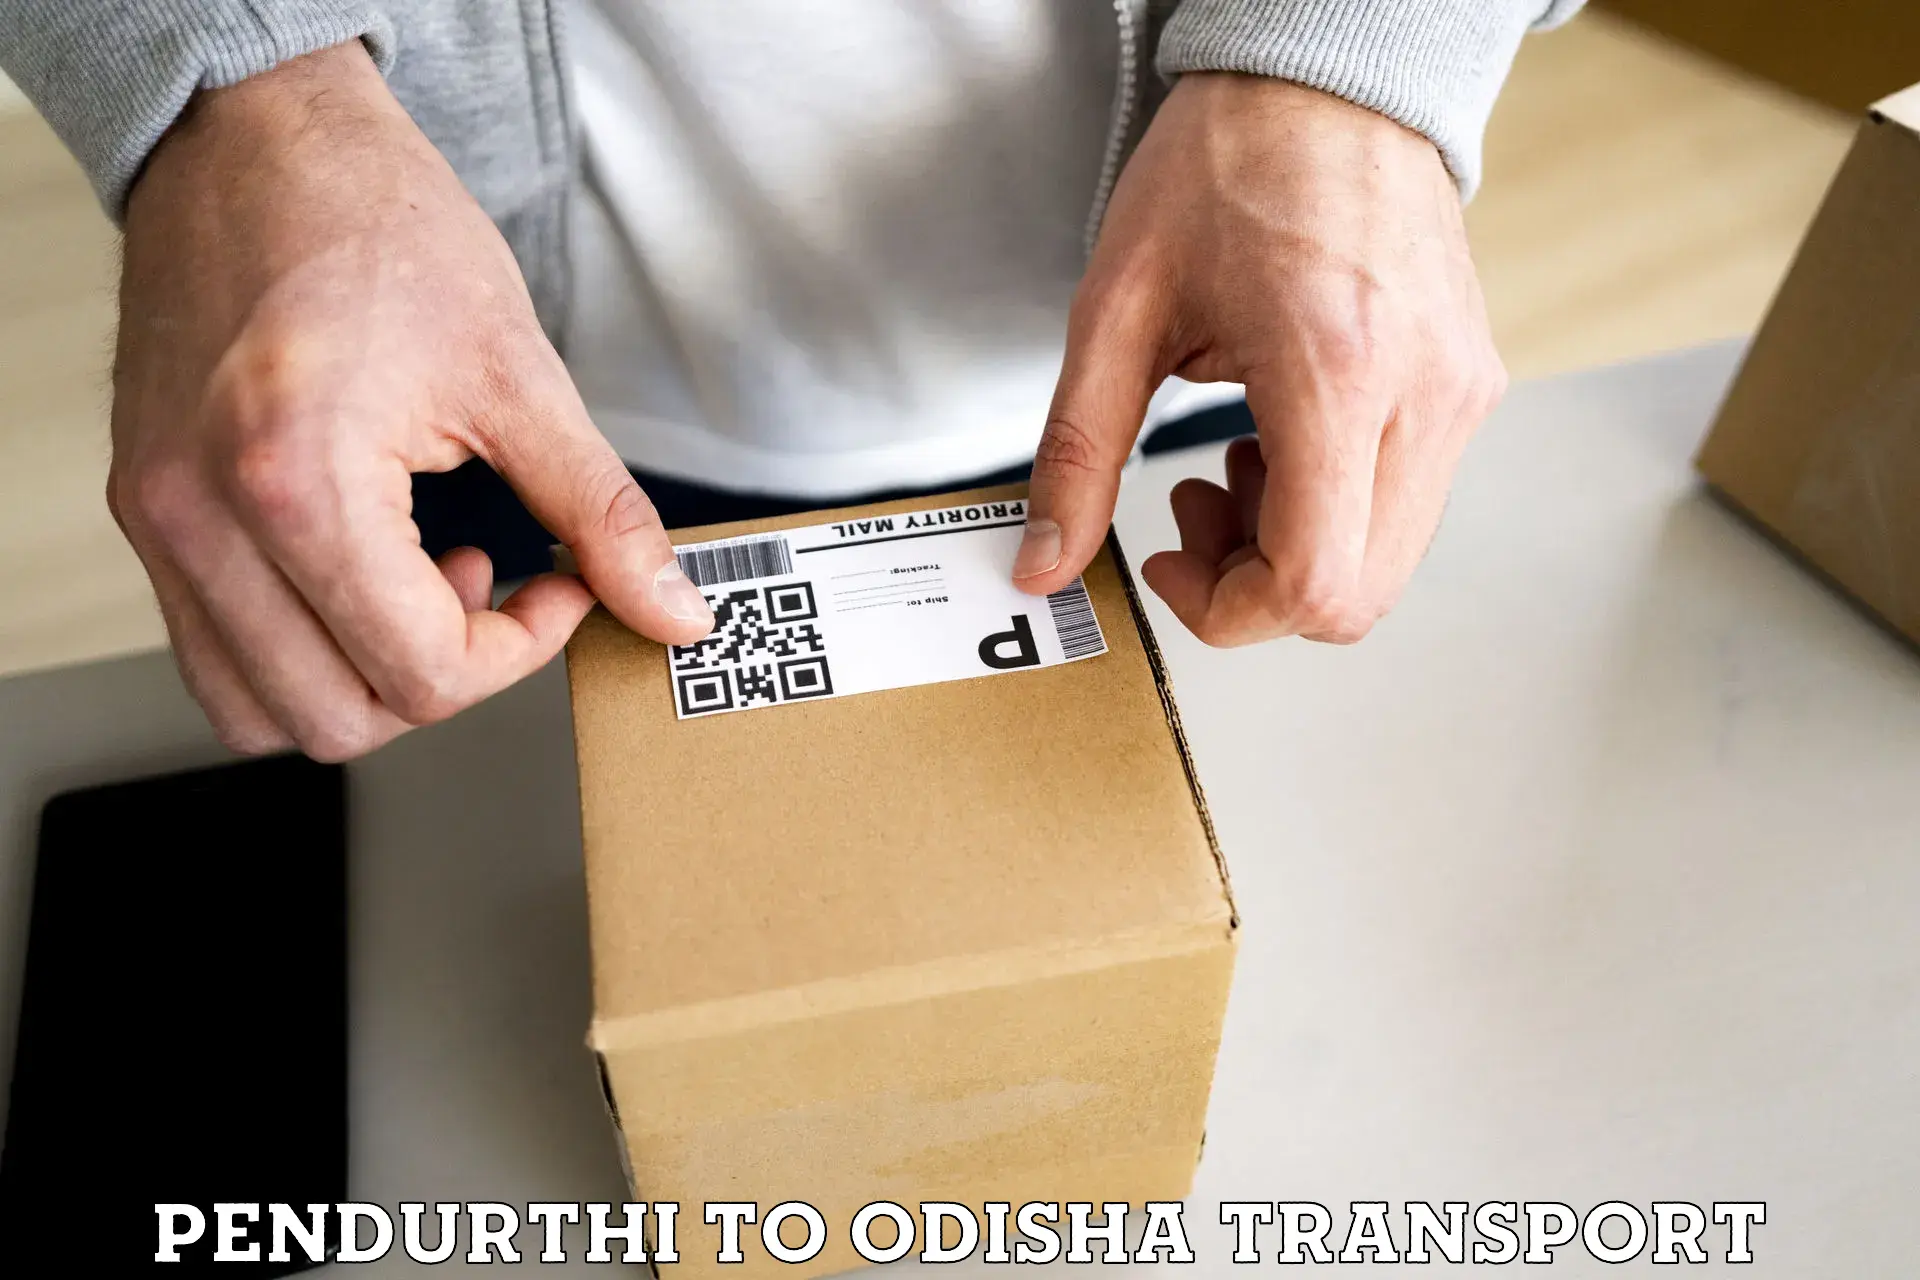 Parcel transport services Pendurthi to Aul